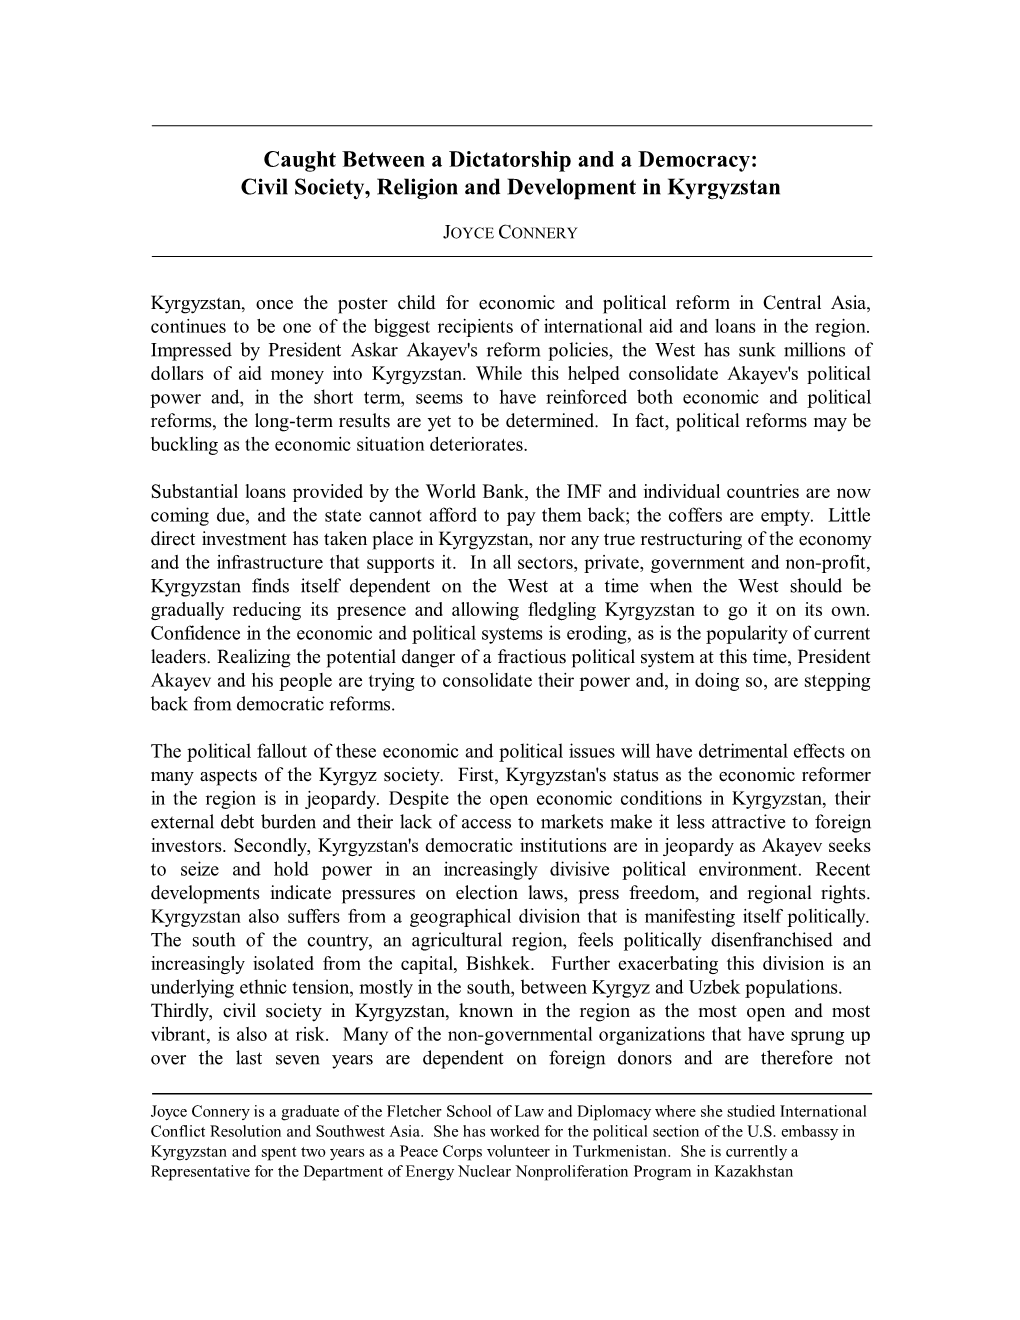 Civil Society, Religion and Development in Kyrgyzstan